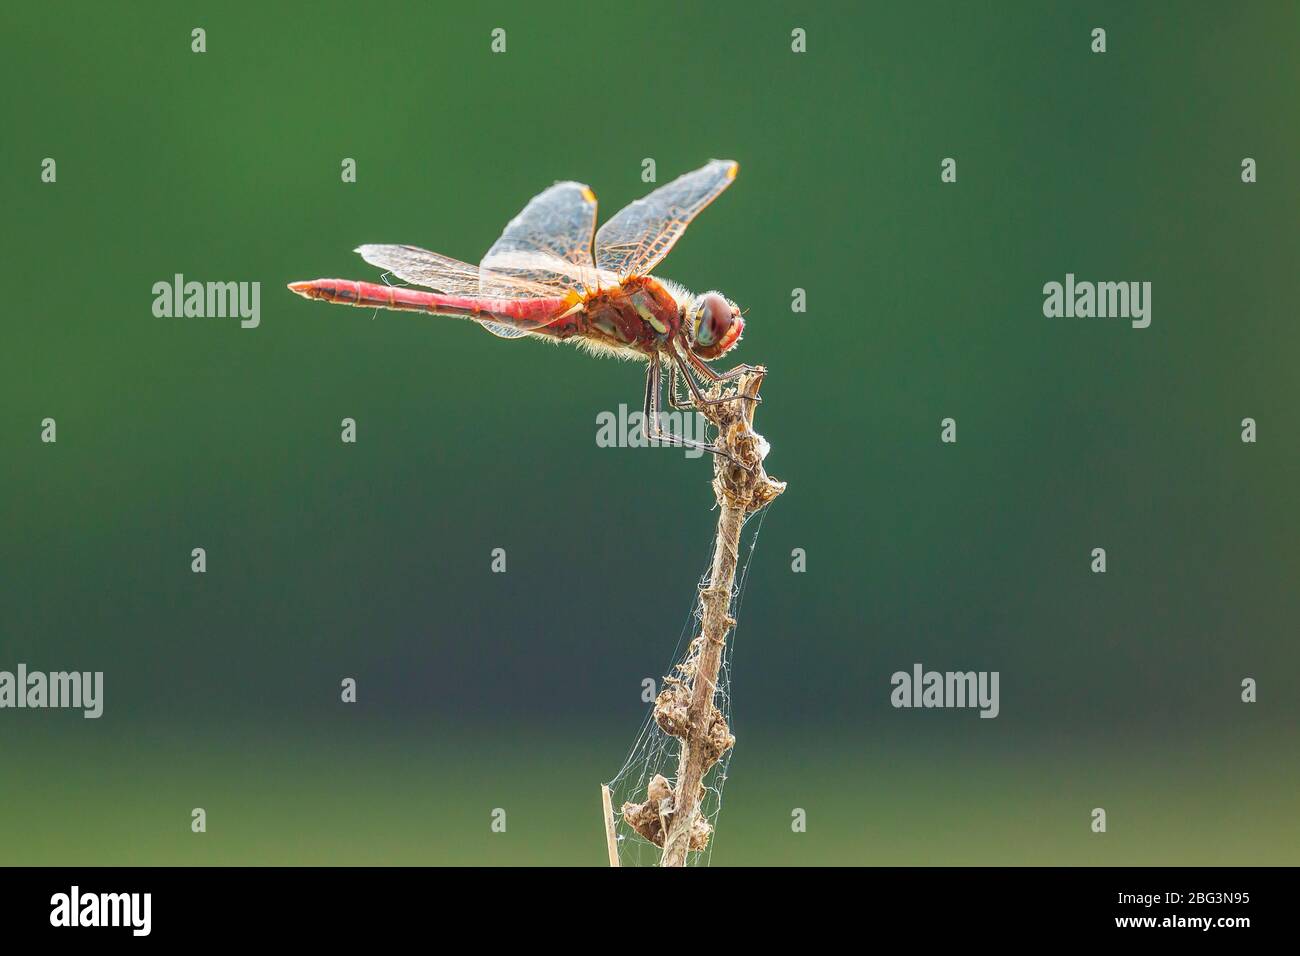 Close-up of a red male Sympetrum fonscolombii, Red-veined darter or nomad resting on vegetation Stock Photo